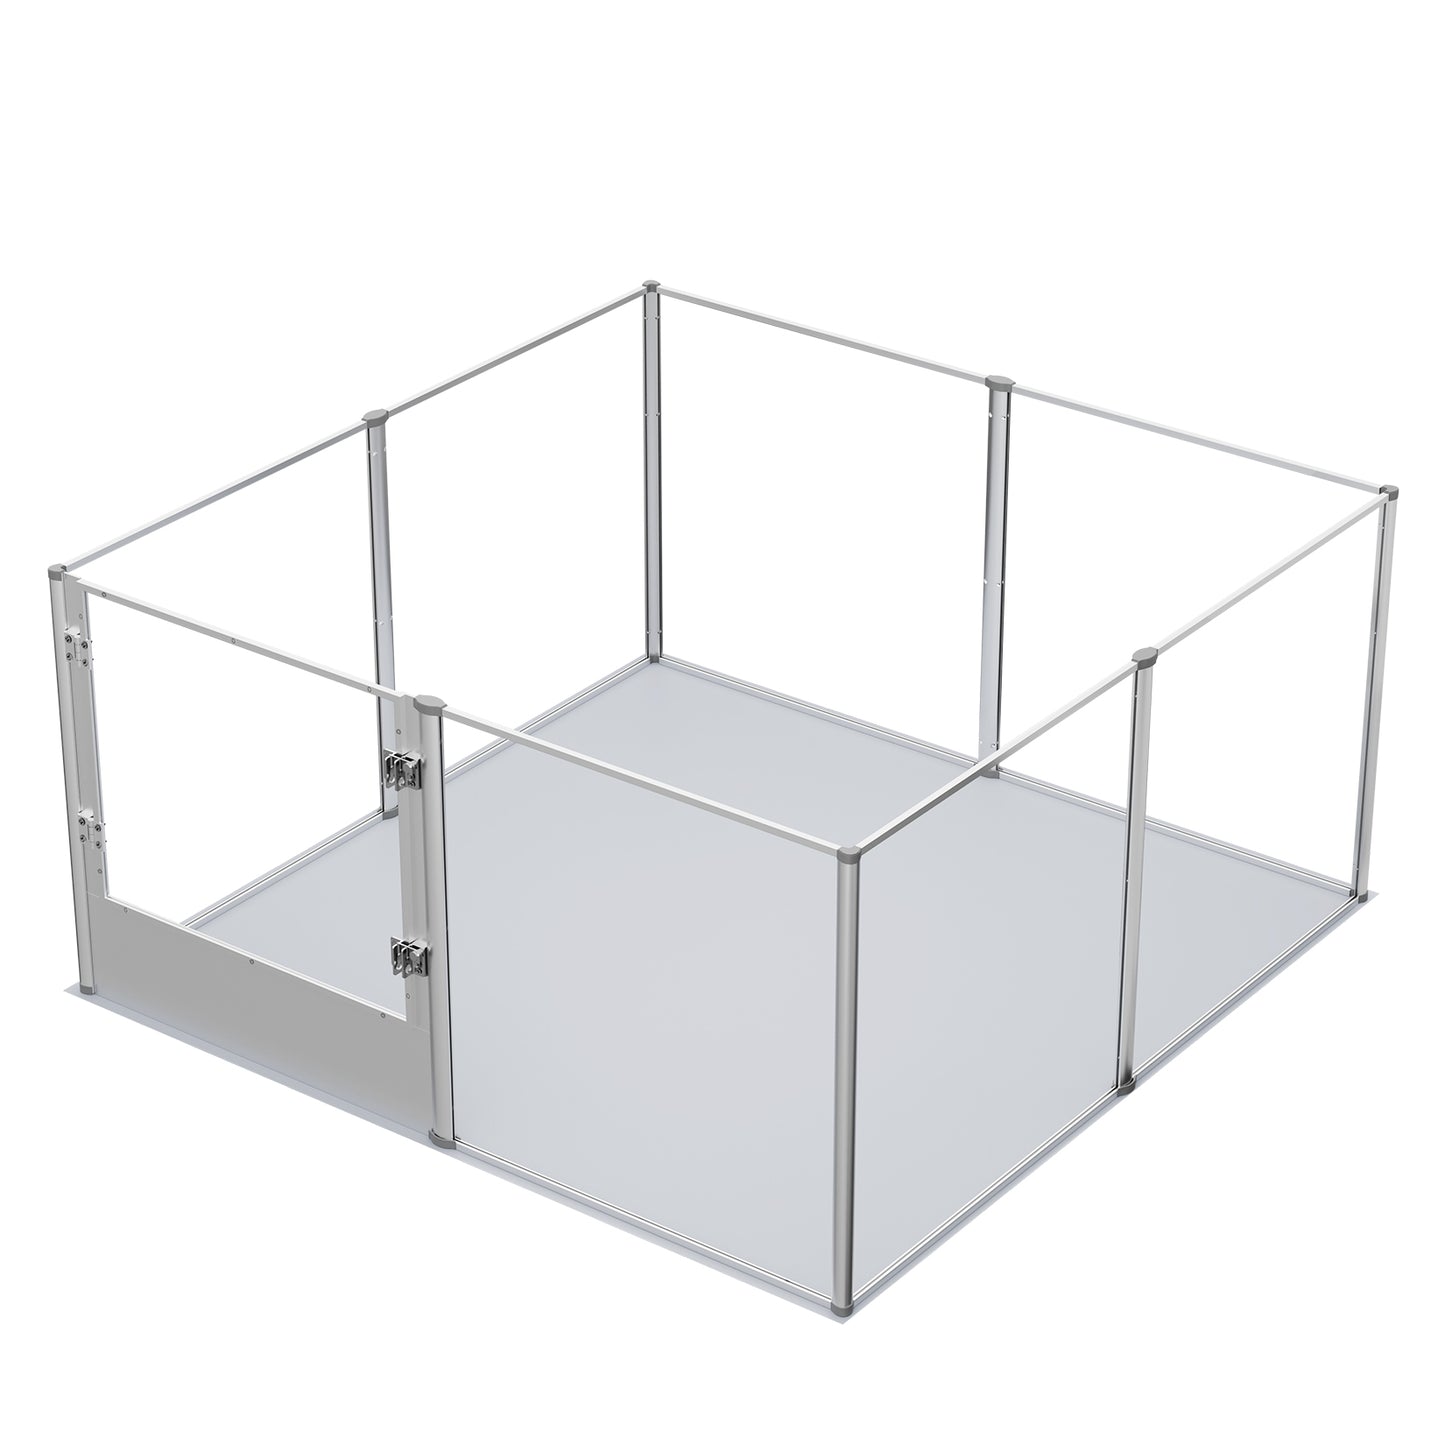 Acrylic Dog Playpen Fence: Indoor Pet Whelping Pen Box Dog Playpen Kennel 32in Taller with Waterproof Fertility Pad for Puppies, Rabbits, Guinea Pig